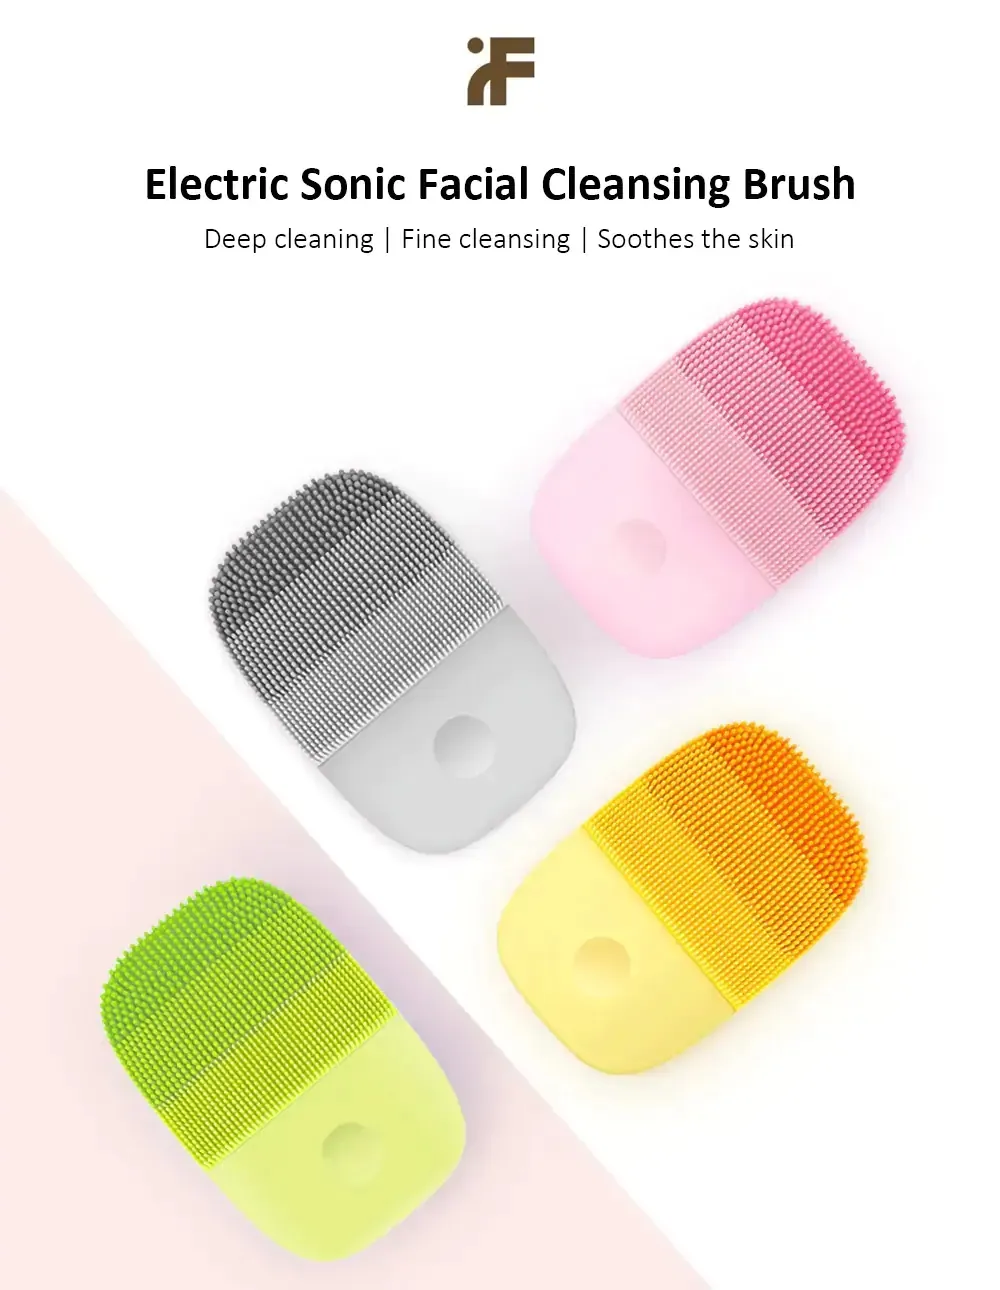 Xiaomi YouPin Inceace Facial Cleaning Brush Mijia Deep Cleansing Face Waterproof Silicone Electric Sonic Cleanser Clean Apparaat C1